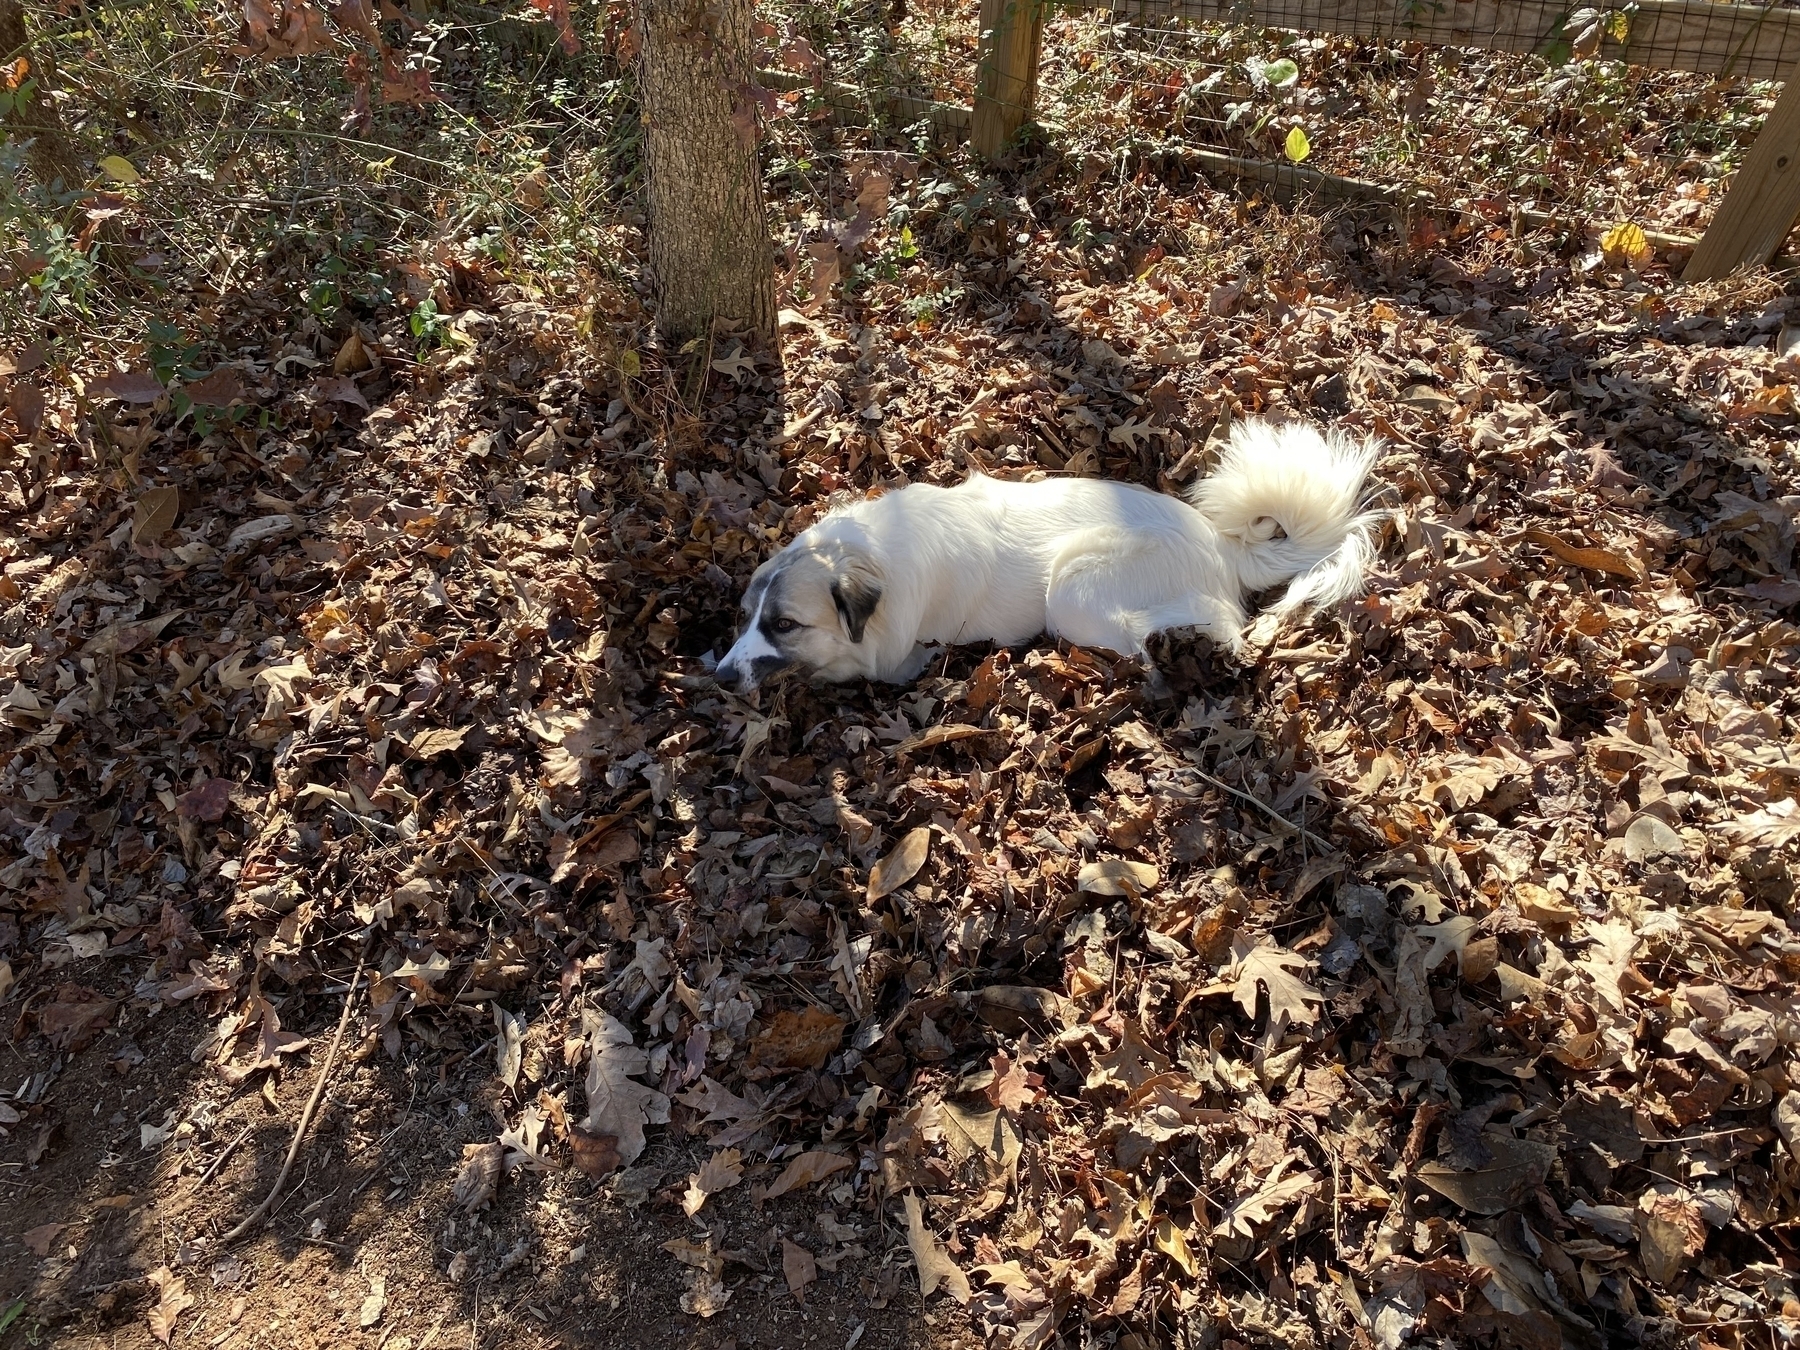 Our puppy, Gracie, laying in a pile of leaves.